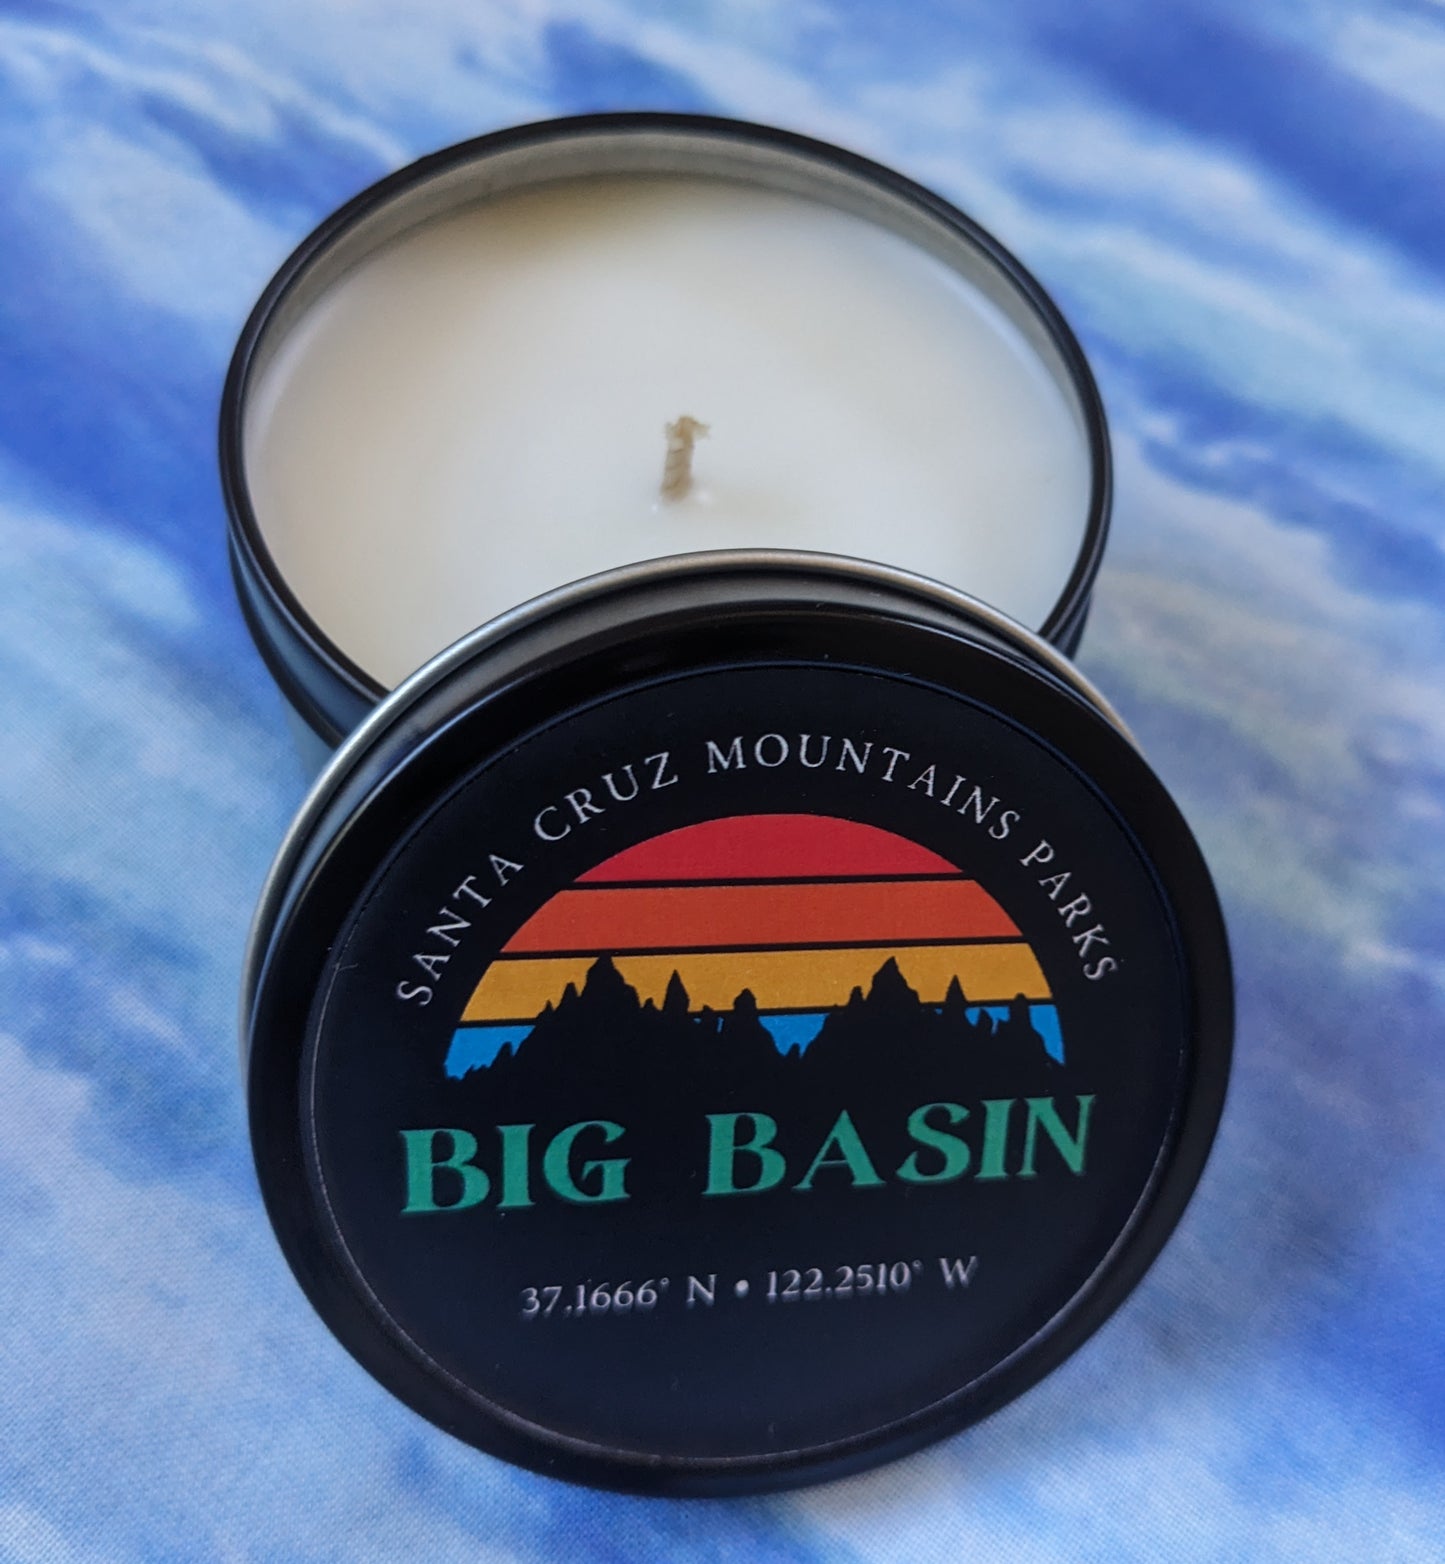 Big Basin travel tin candle with top open